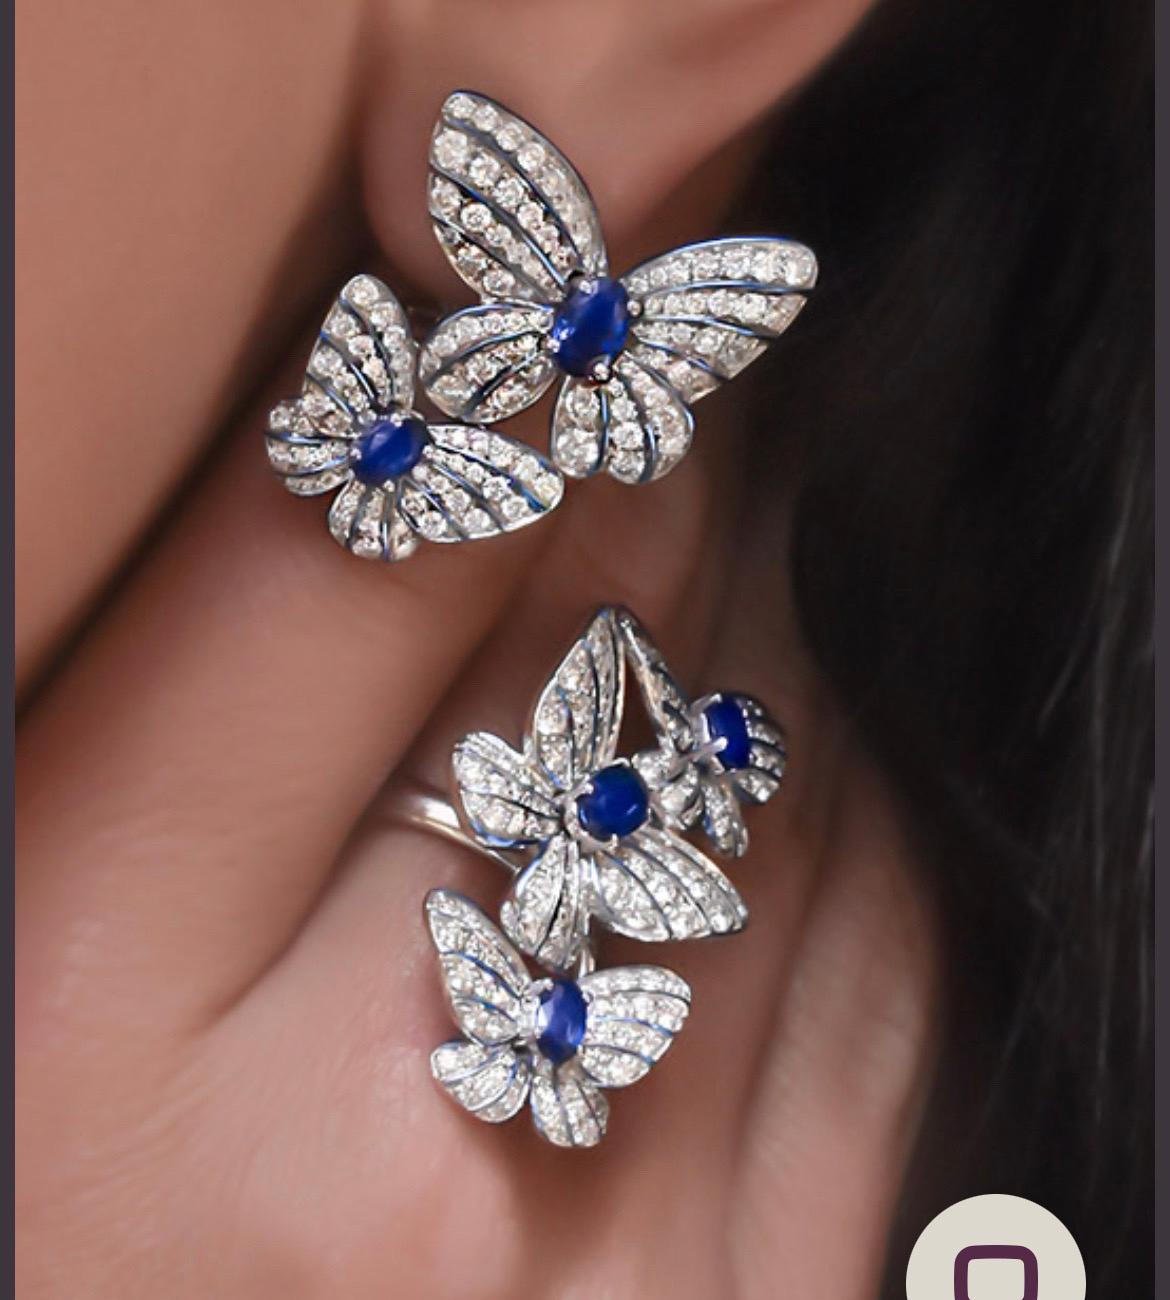 Magnificent 18 karat white gold ring designed with 3 pavé  diamond butterflies. 
Each butterfly centers an oval blue sapphire. The delicacy and vibrancy of the butterfly is further enhanced with hand painted iridescent blue enamel.
Total Diamond